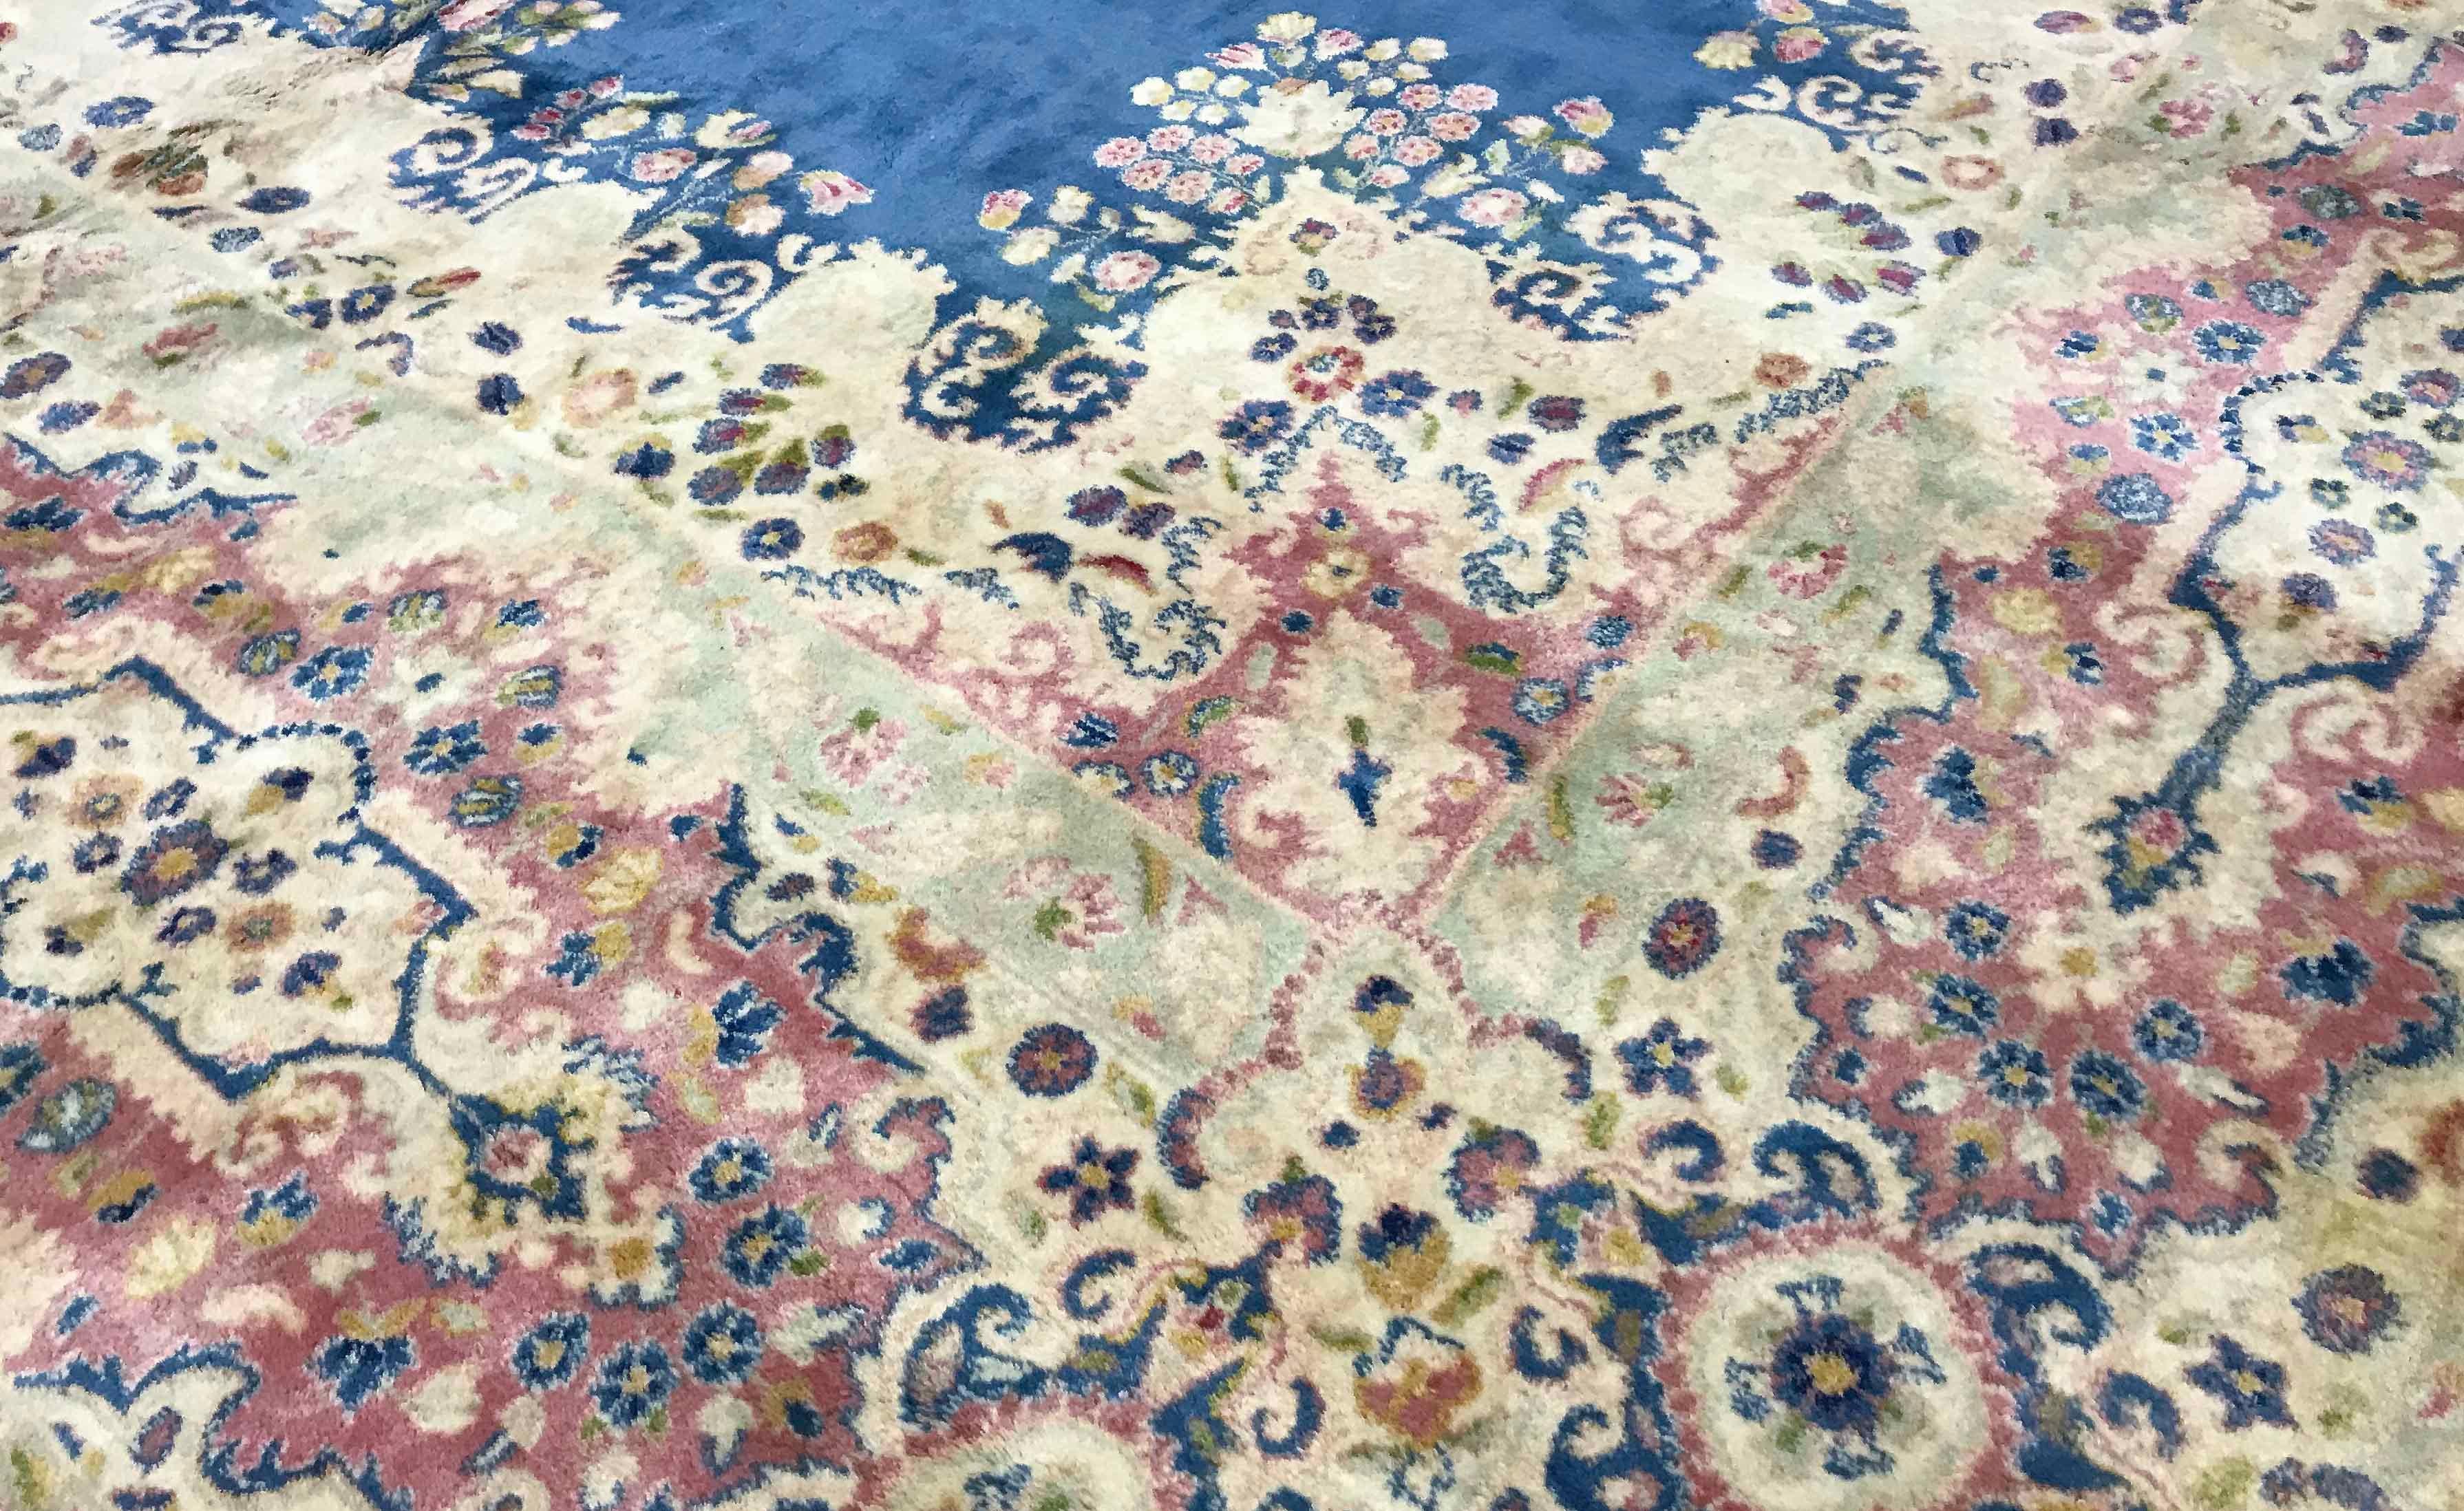 Vintage Persian oversize Kerman rug, circa 1940. The soft blue field on which has been placed an elaborate medallion design and bounded by repeating floral patterns is then enclosed by a main border continuing the floral theme. The skill of the